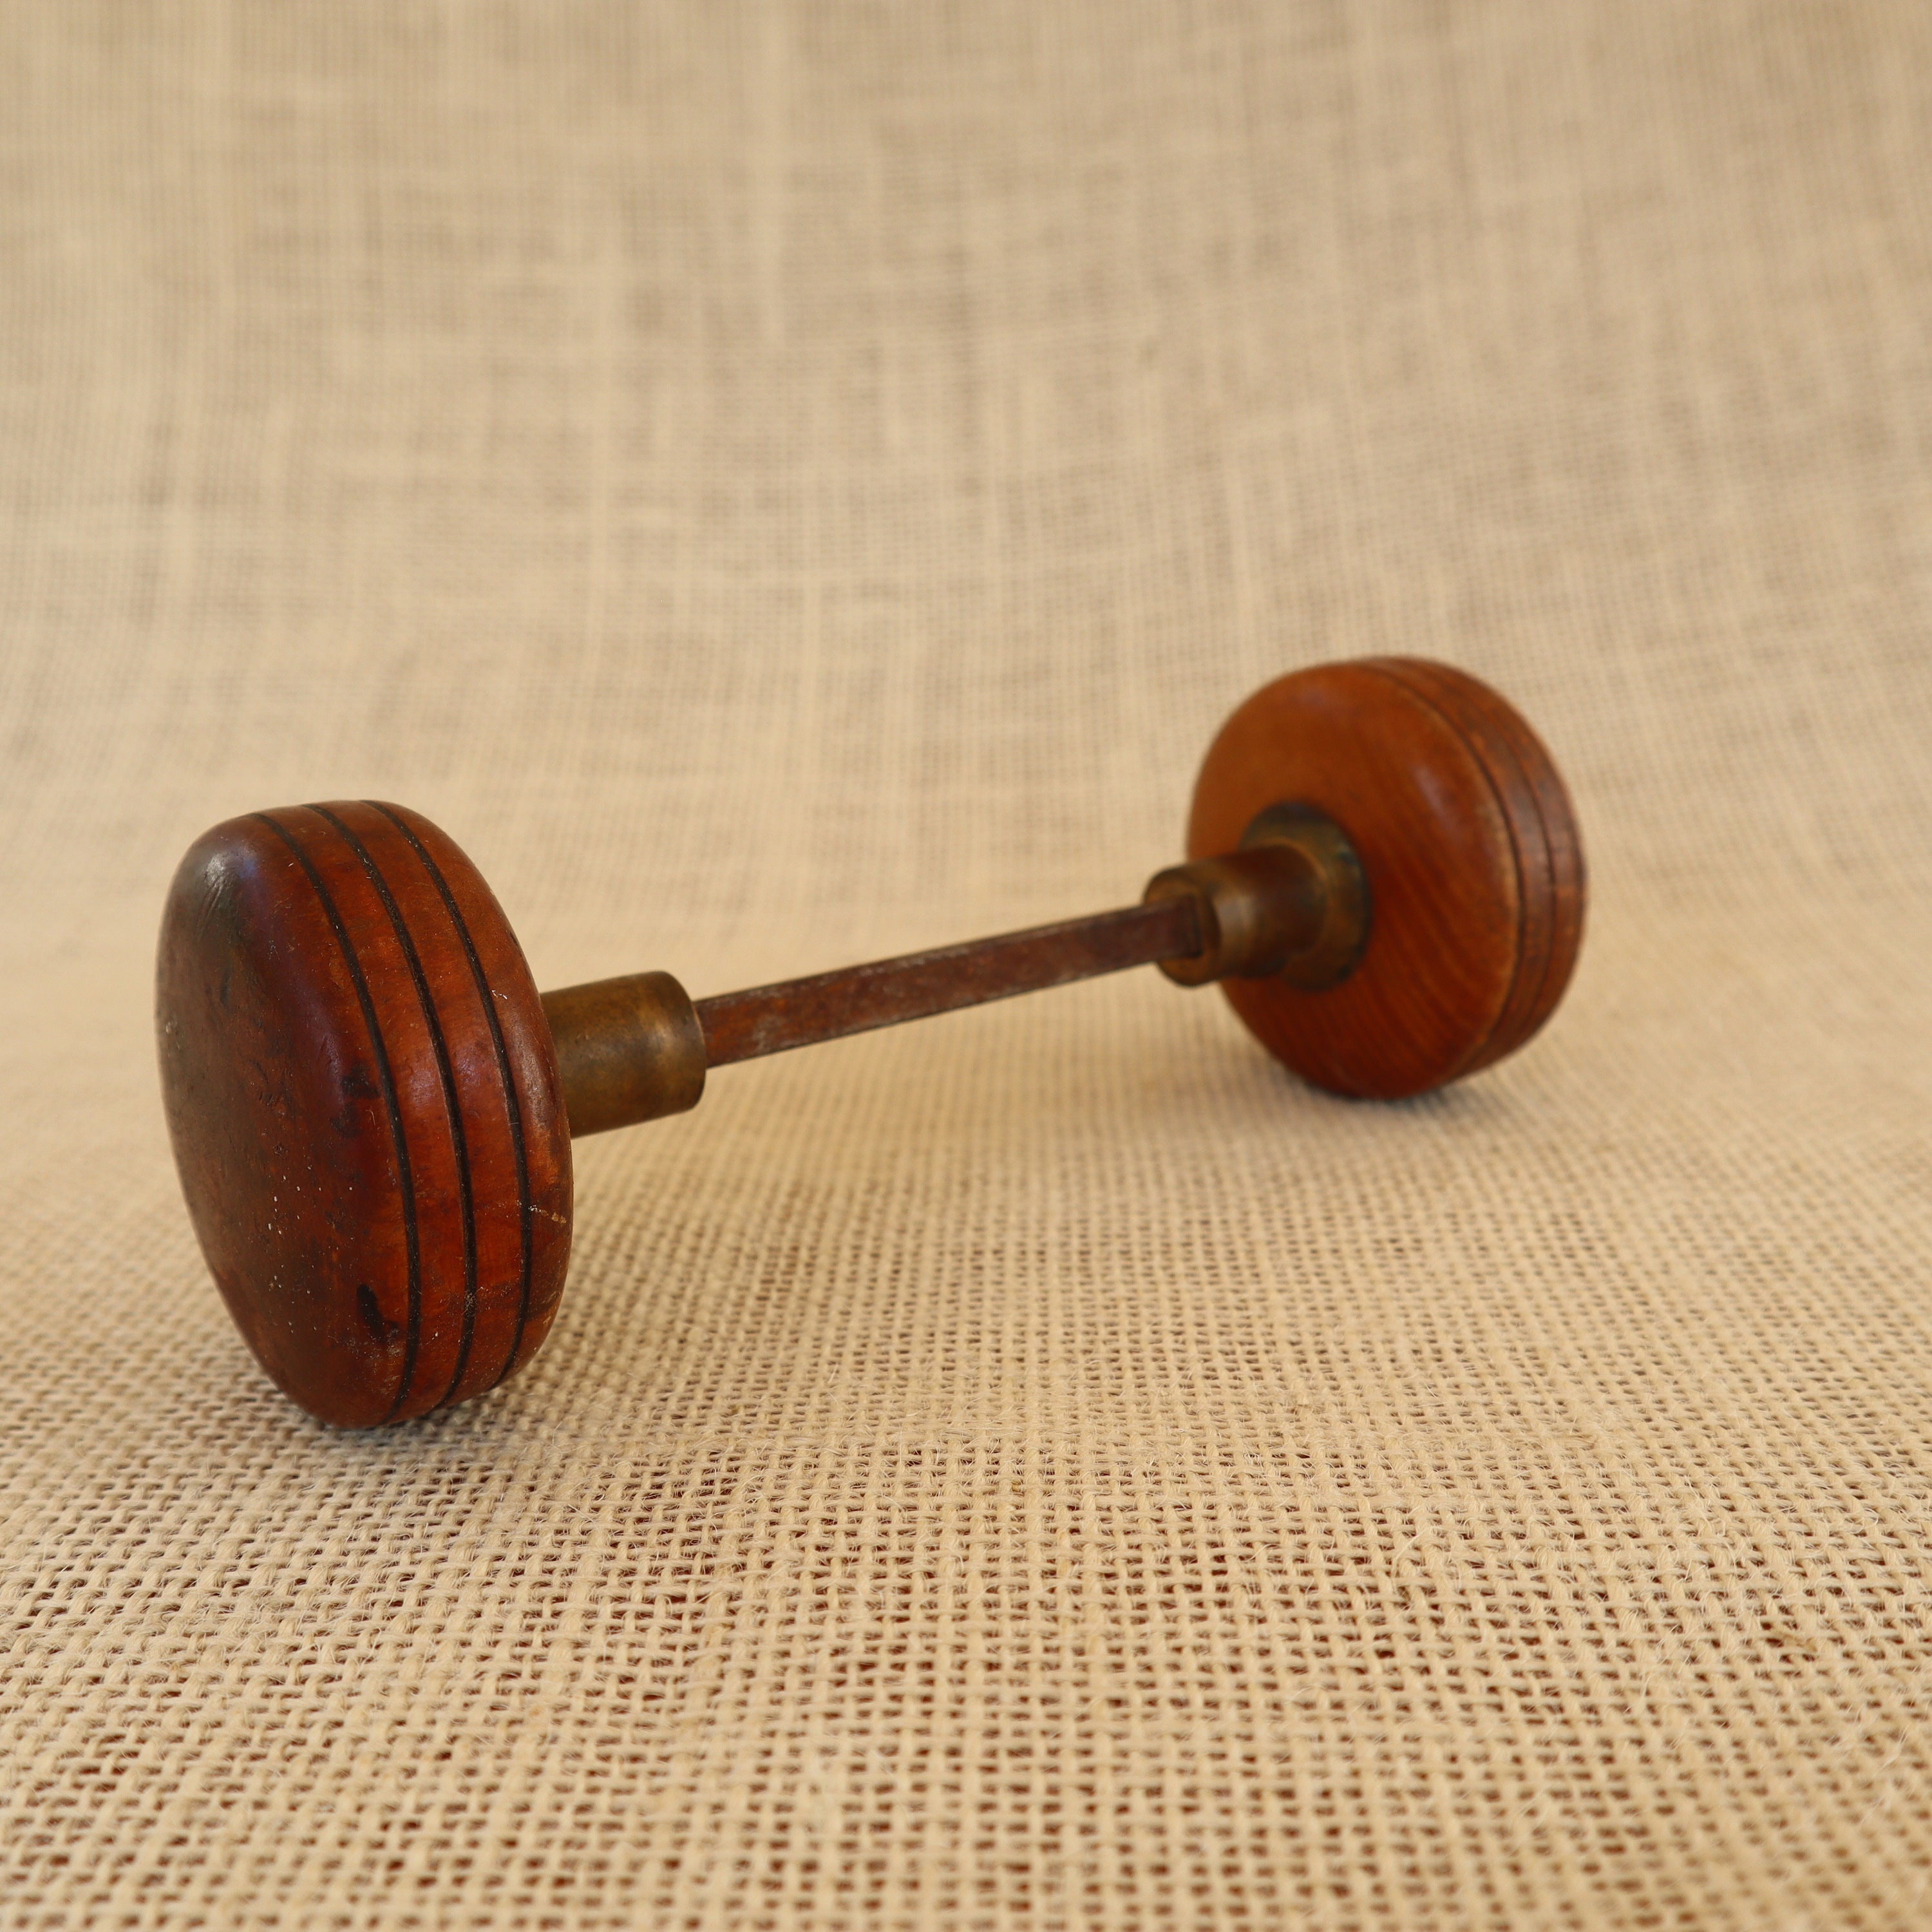 Vintage Wooden Door Knob Handle Wood 5 Sets pairs Available £29.95 each reclaime 